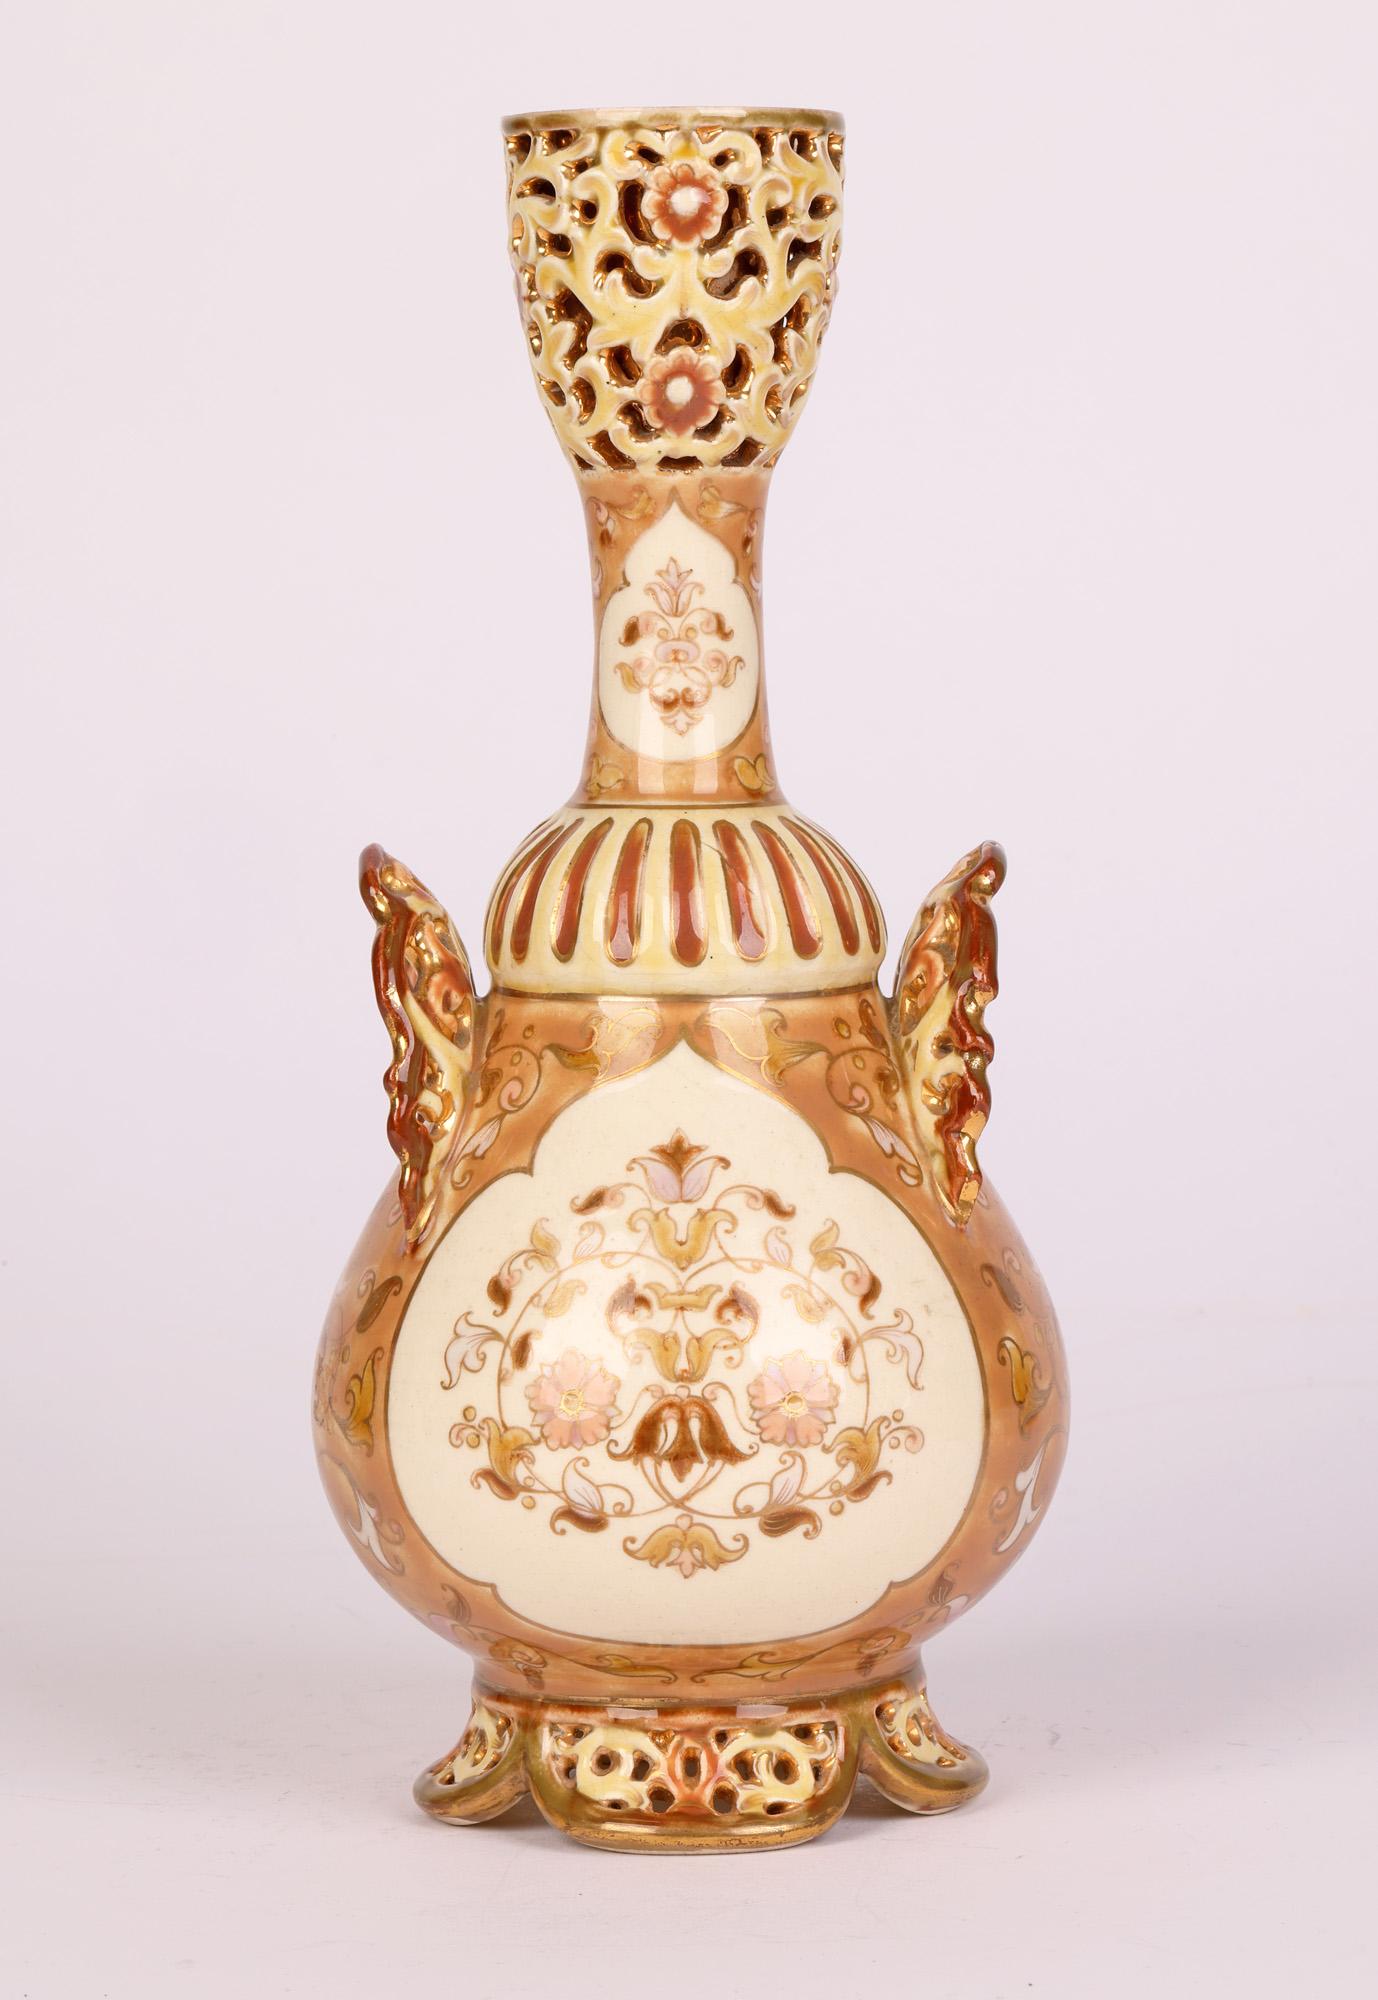 Zsolnay Hungarian Islamic Influence Floral Painted Porcelain Vase In Good Condition For Sale In Bishop's Stortford, Hertfordshire